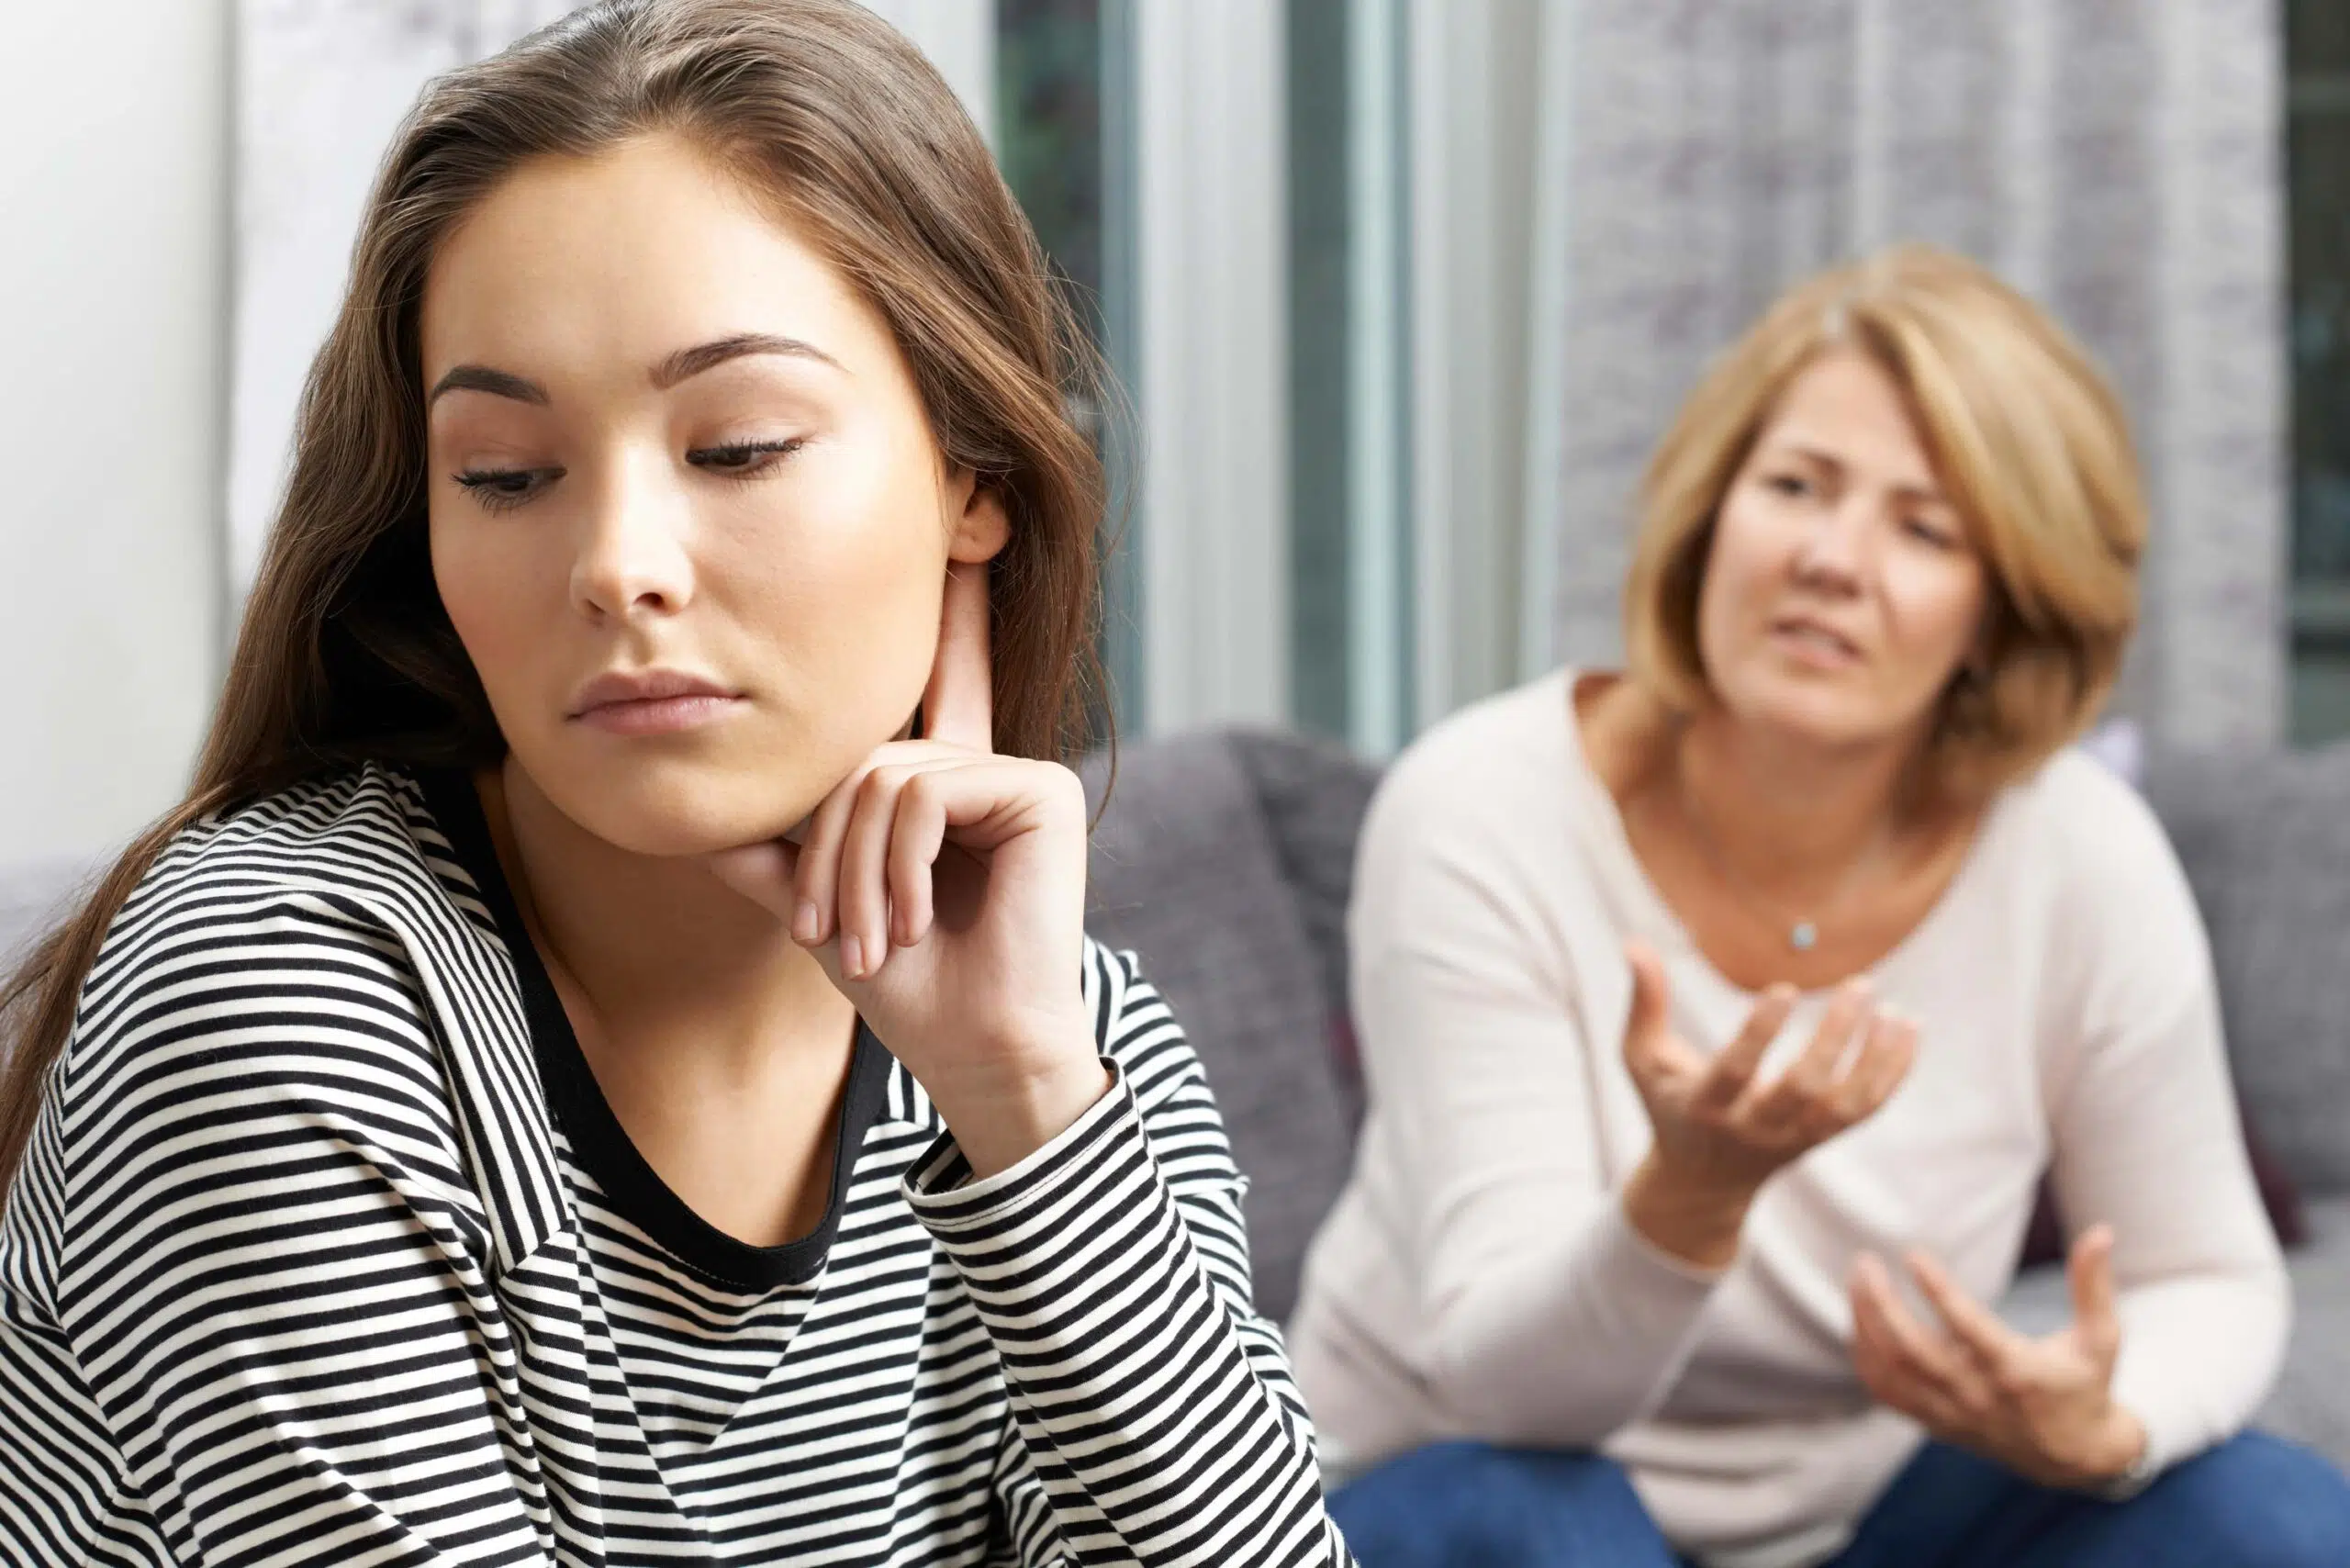 Teen looks away from mum in disgust scaled